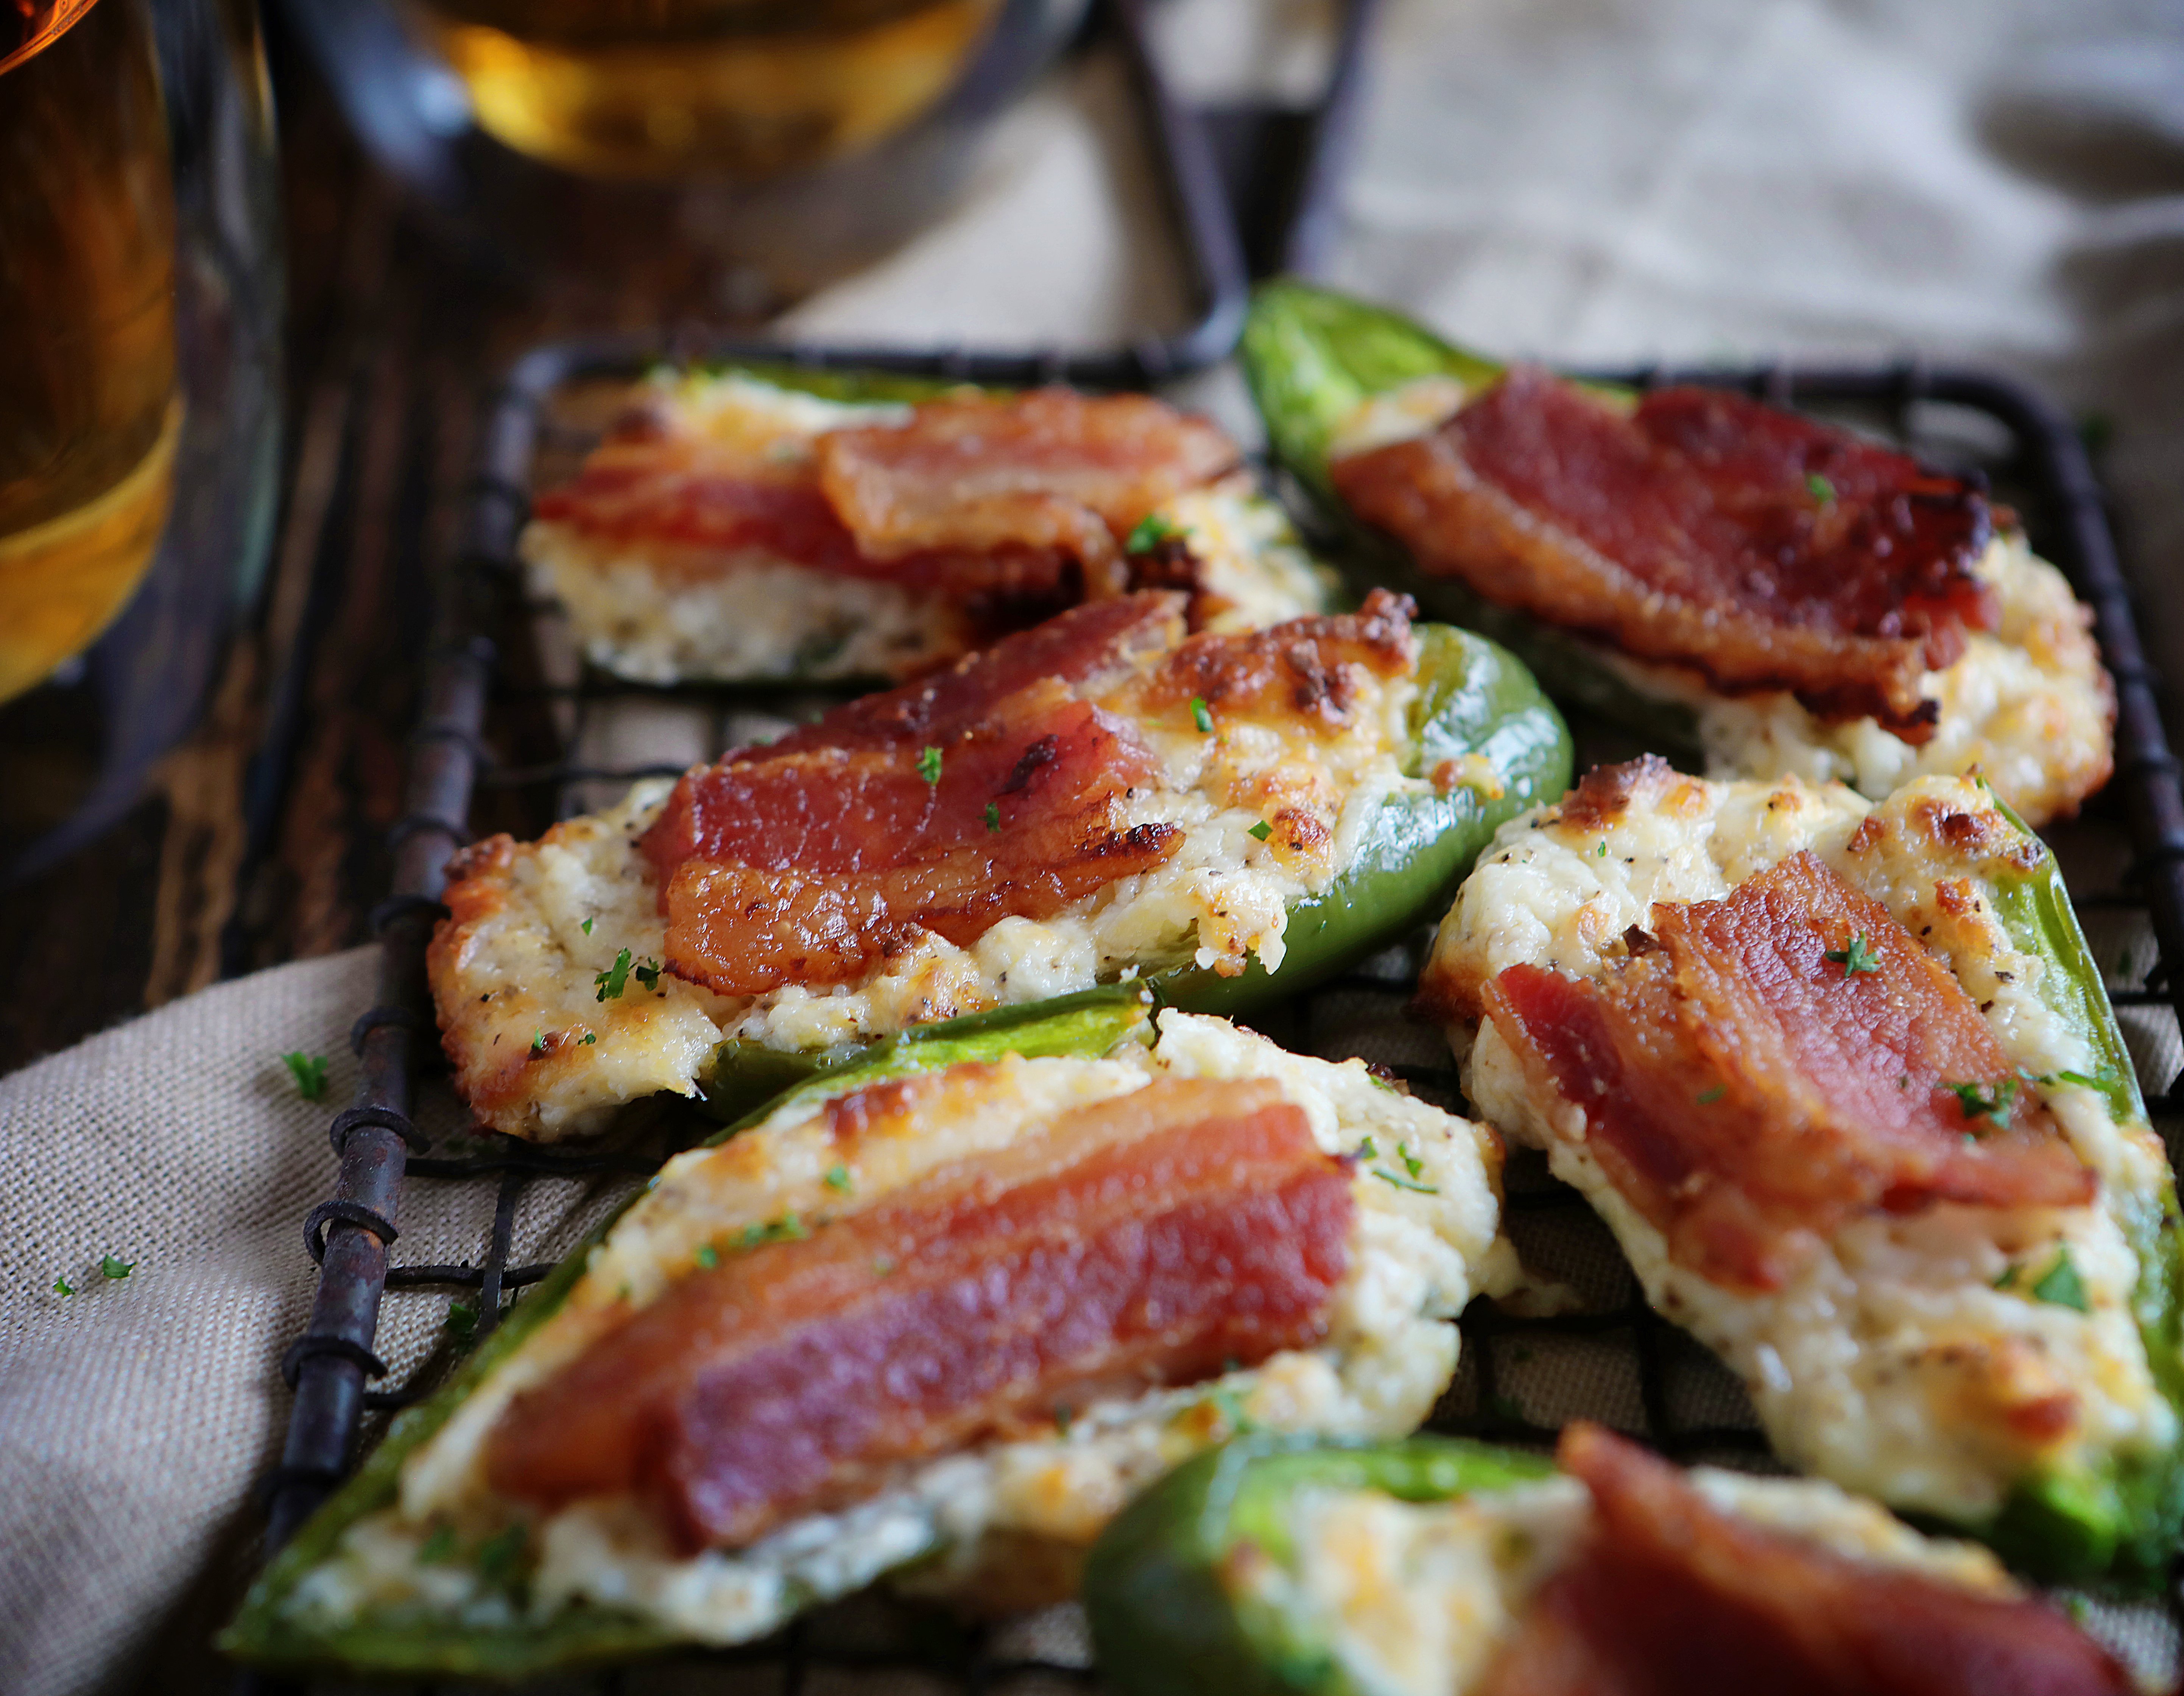 Bacon Jalapeno Poppers Stuffed With Cream Cheese I Am Baker,How To Blanch Almonds Easily